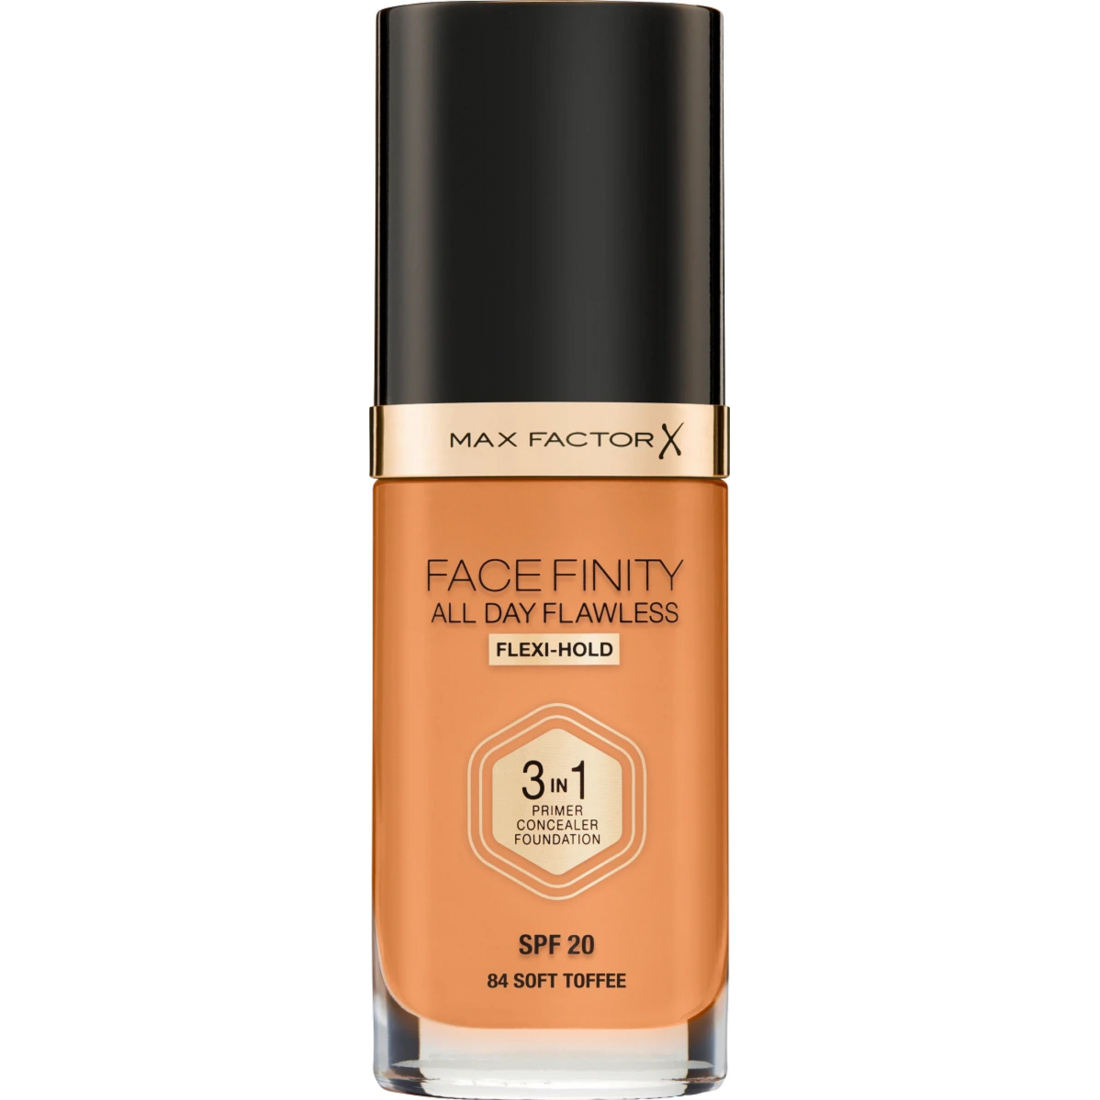 Fond de teint 'Facefinity All Day Flawless 3 in 1' - 84 Soft Toffee 30 ml